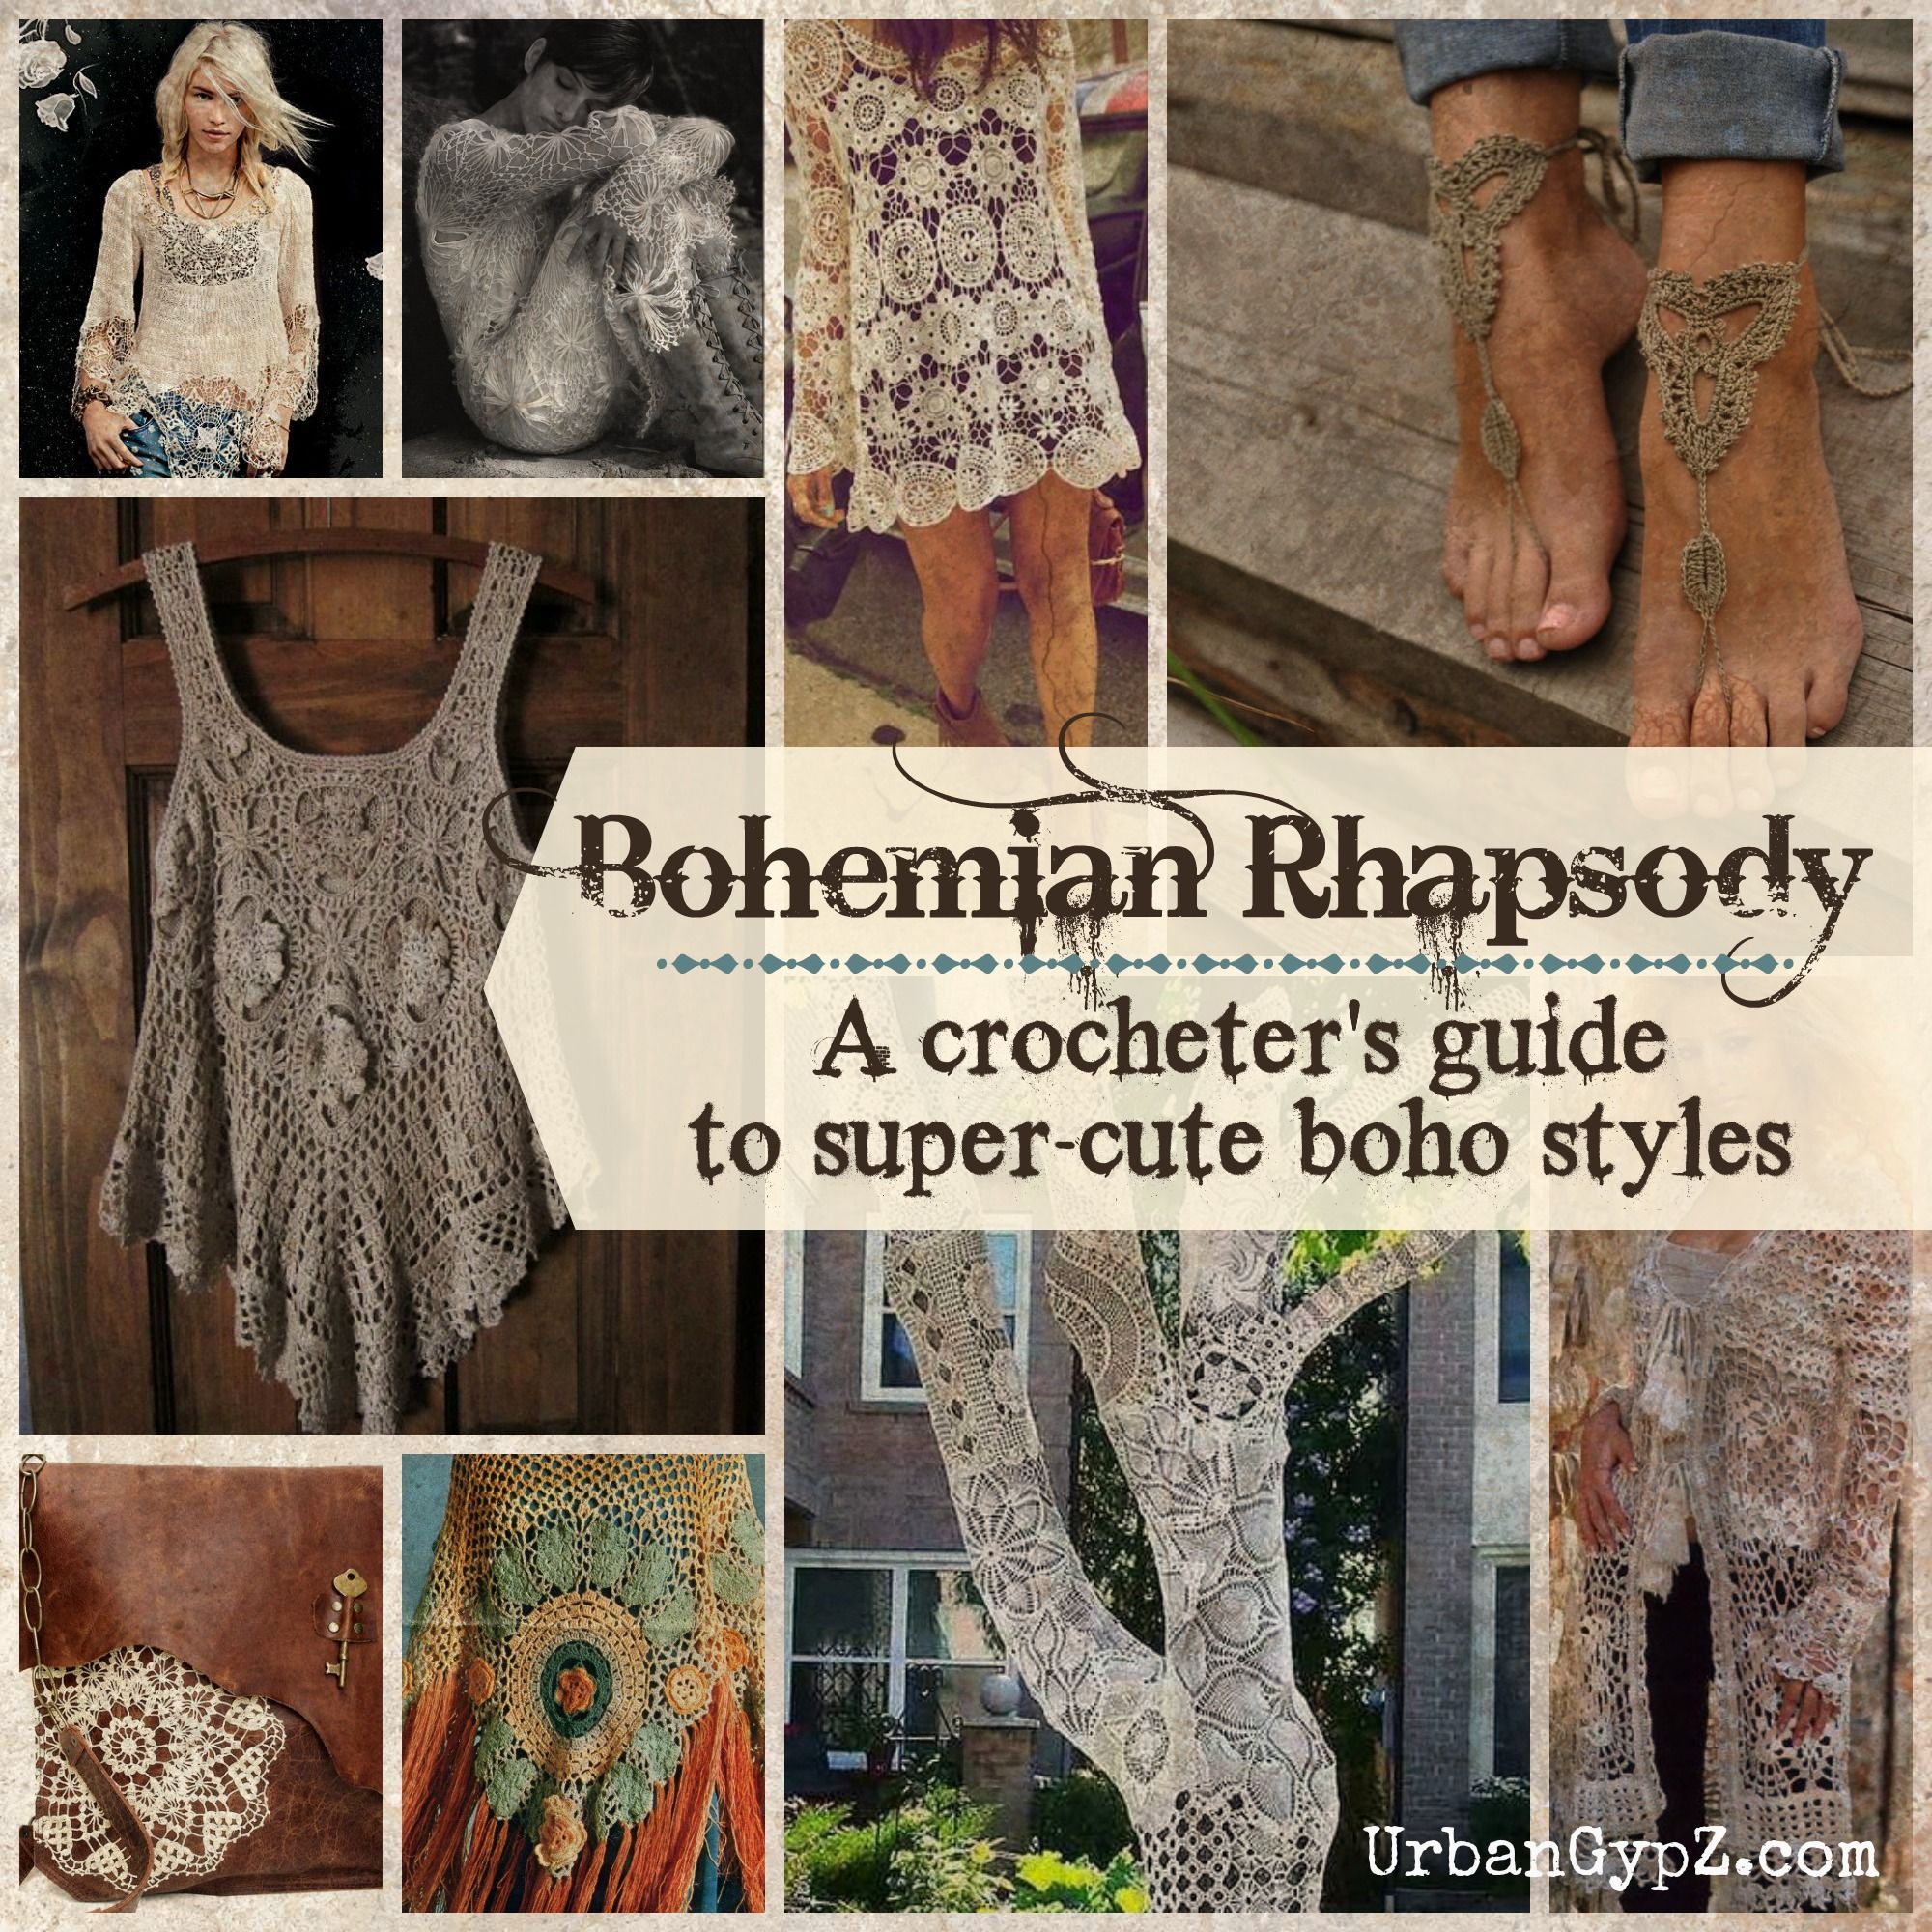 Hippie Boho style lace crochet clothes are hot right now. Here are some of my favorite boho crochet patterns out there. Super cute and very easy to DIY. -   21 boho style crochet
 ideas